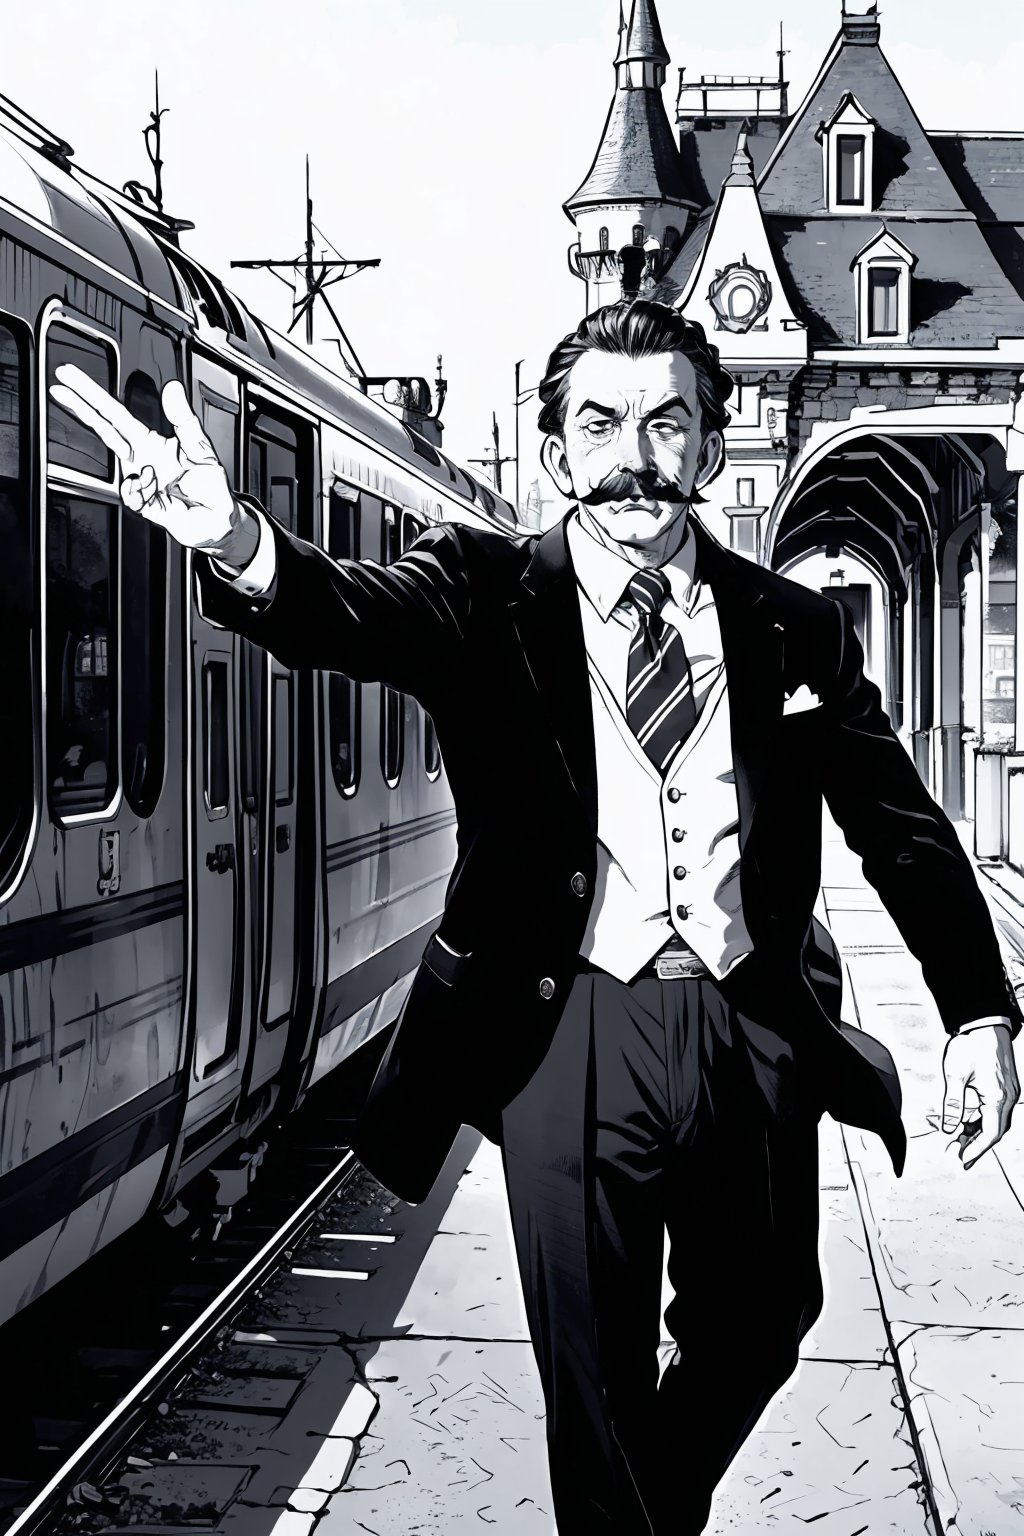 boichi manga style, monochrome, greyscale, solo, he is Walt Disney, the founder of Disneyland, slicked hairstyle, mustache, plaid suit, he spreads his hands left and right, indicating that he has no money, his expression is helpless, full body, a country train station background, ((masterpiece))